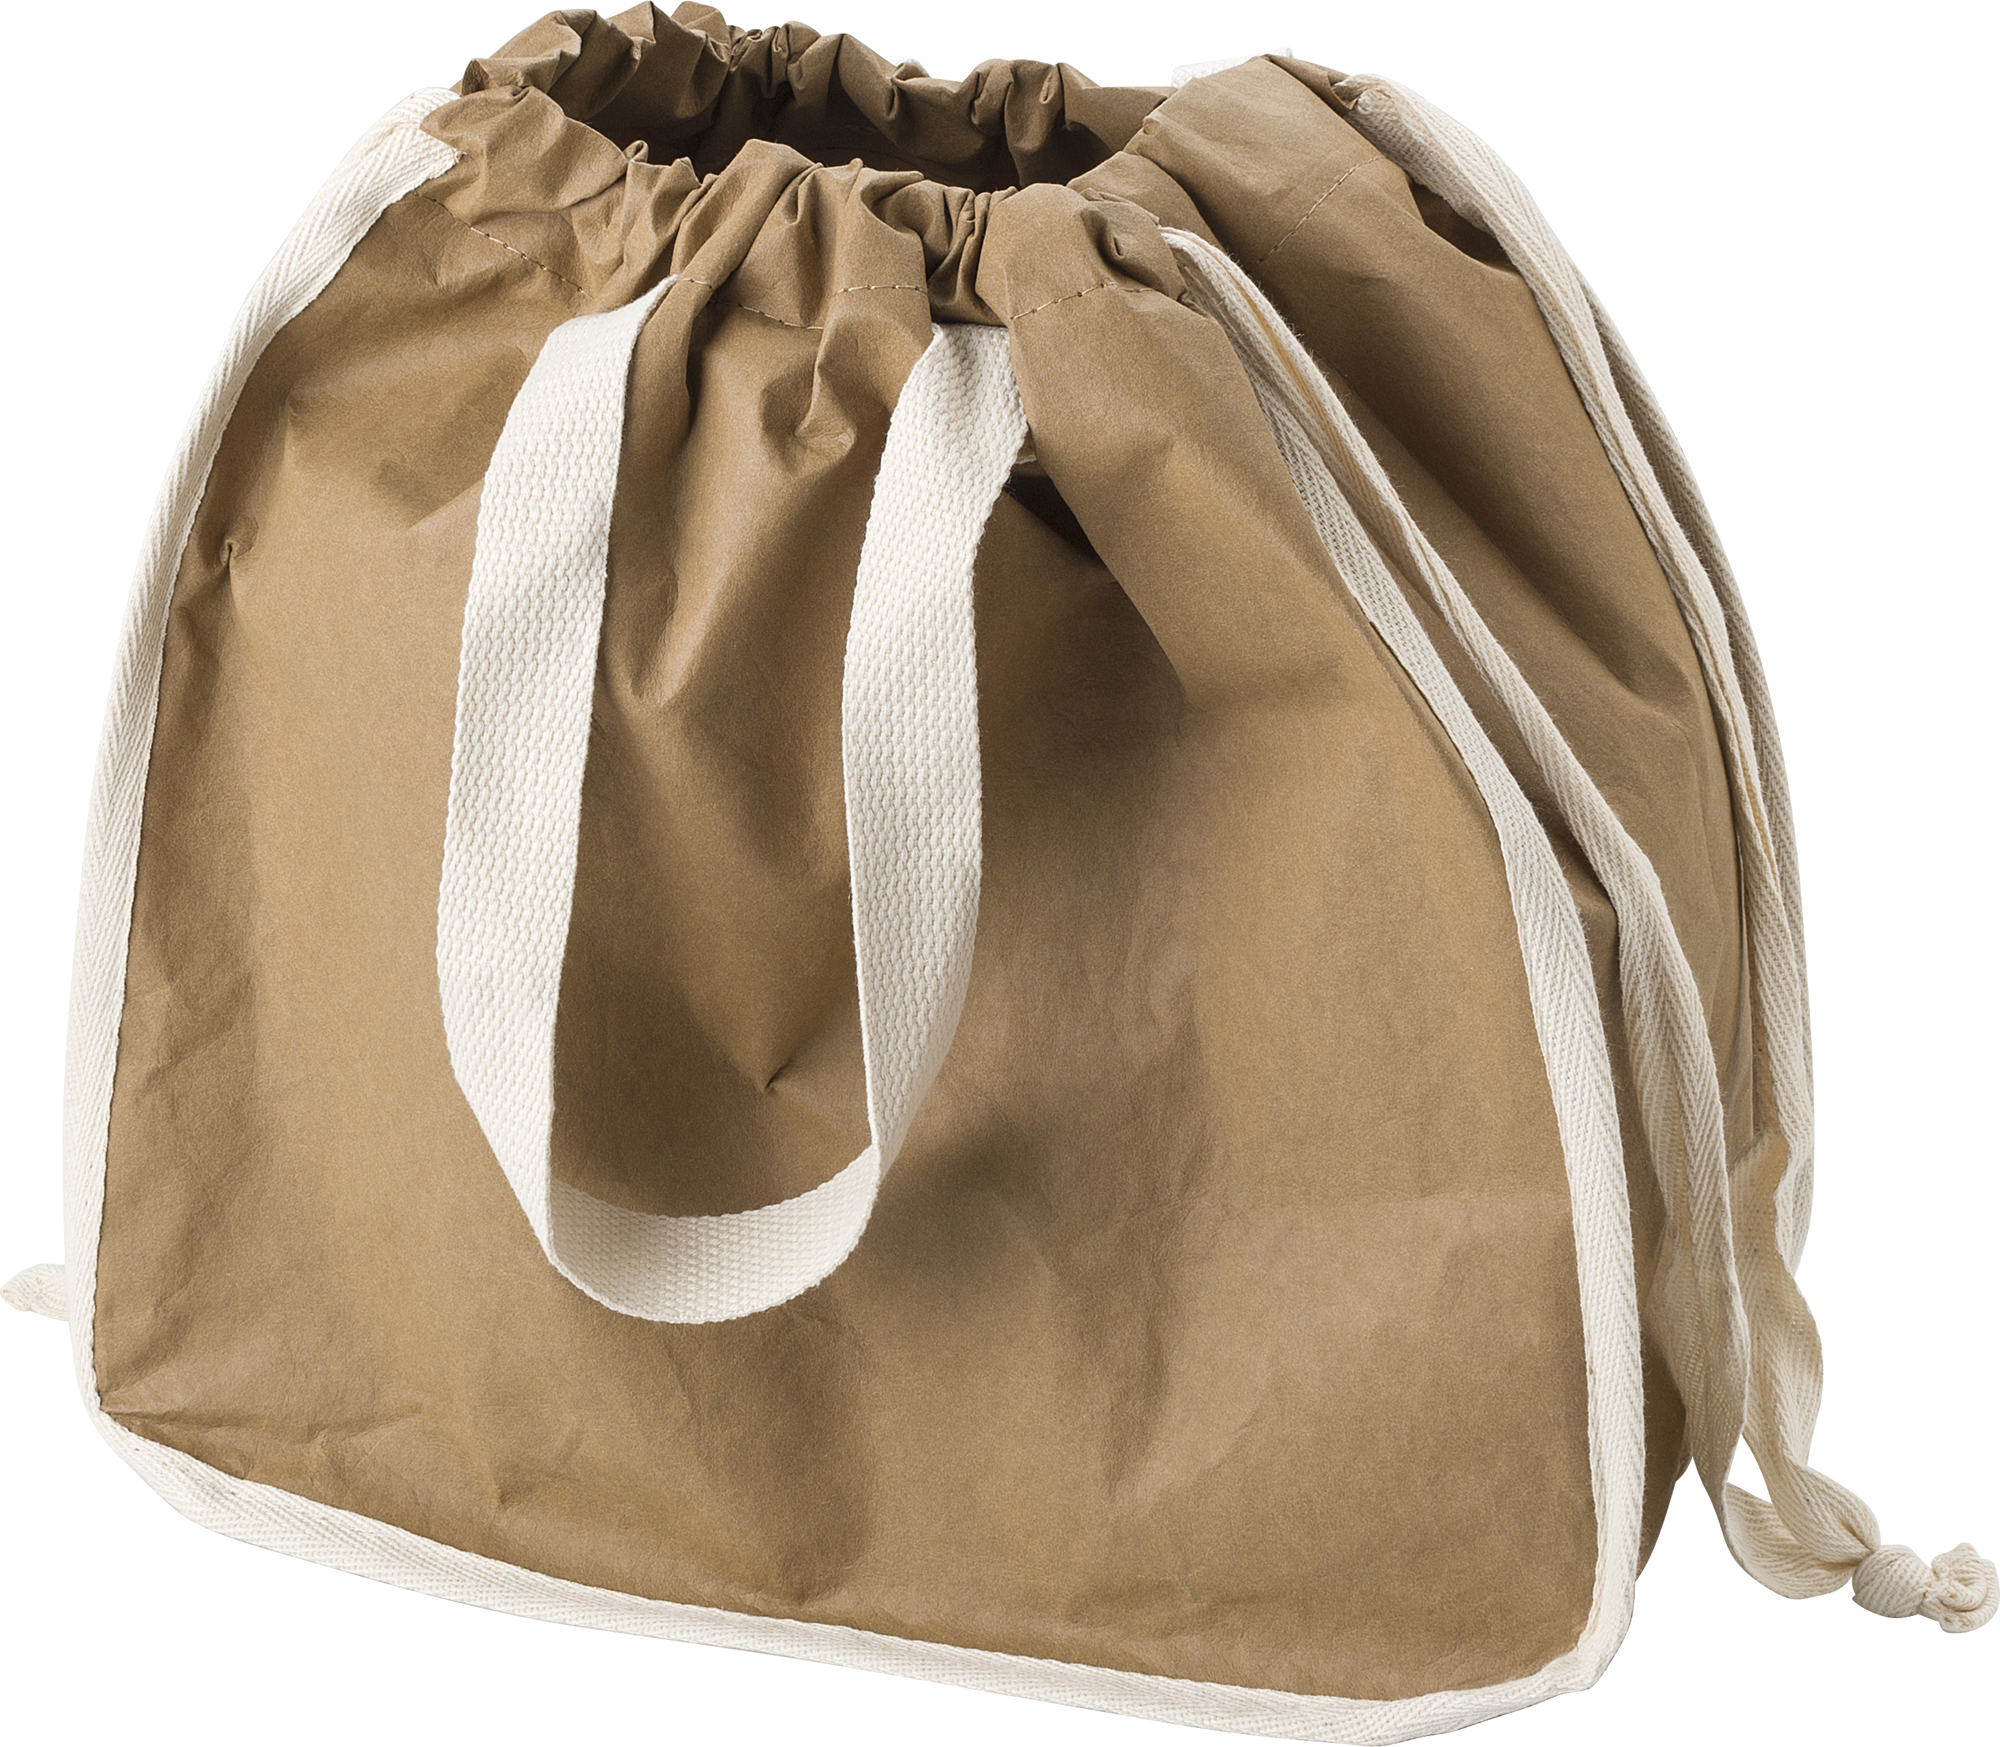 000000967392 011999999 3d045 rgt pro01 2023 fal - Recycled cotton bag